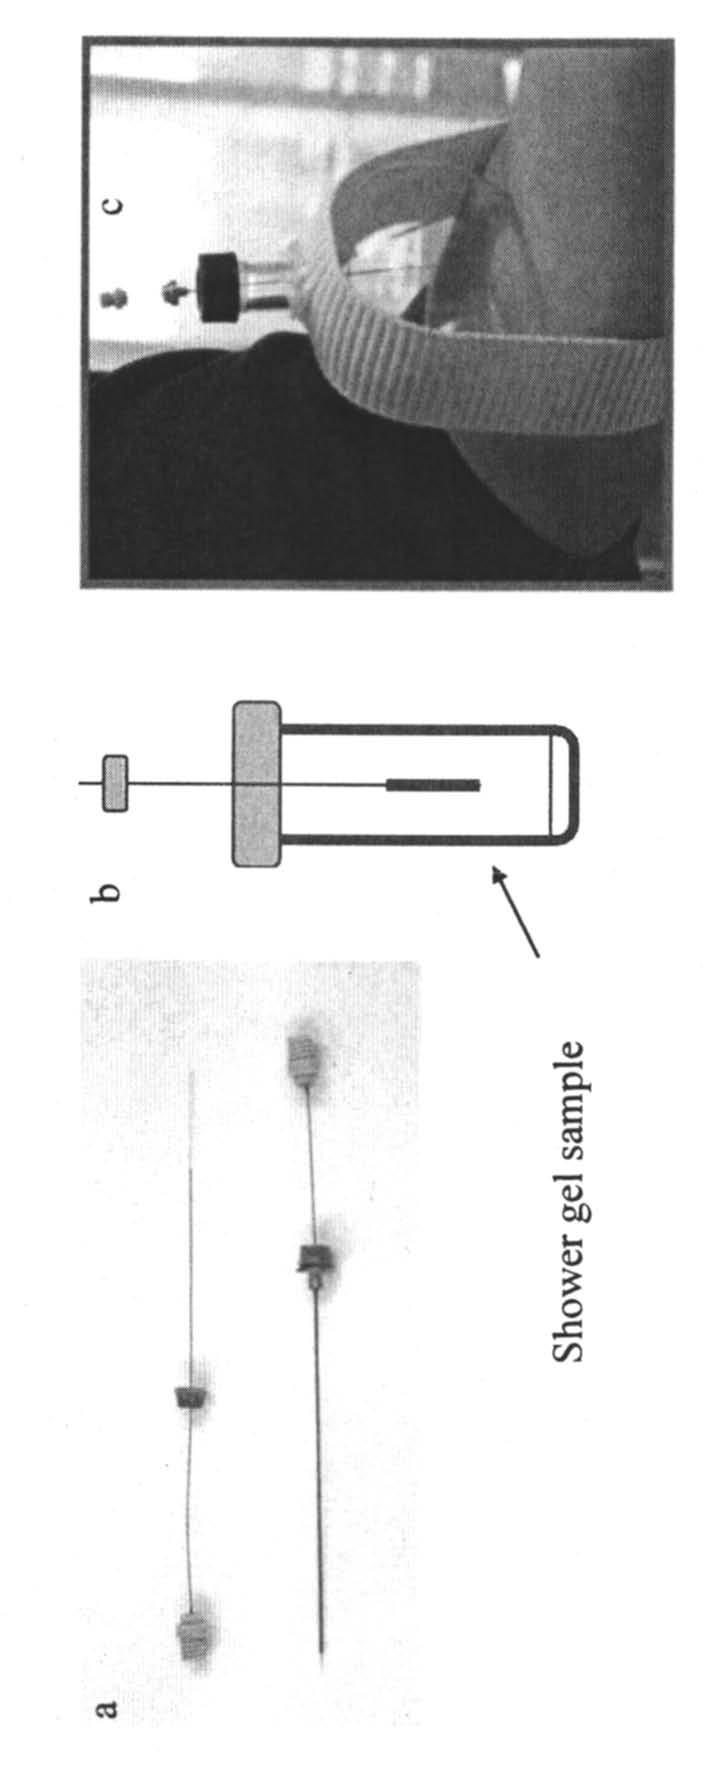 so Figure 1: a) SPME needles coated with PDMS/Carboxen to absorb volatiles from